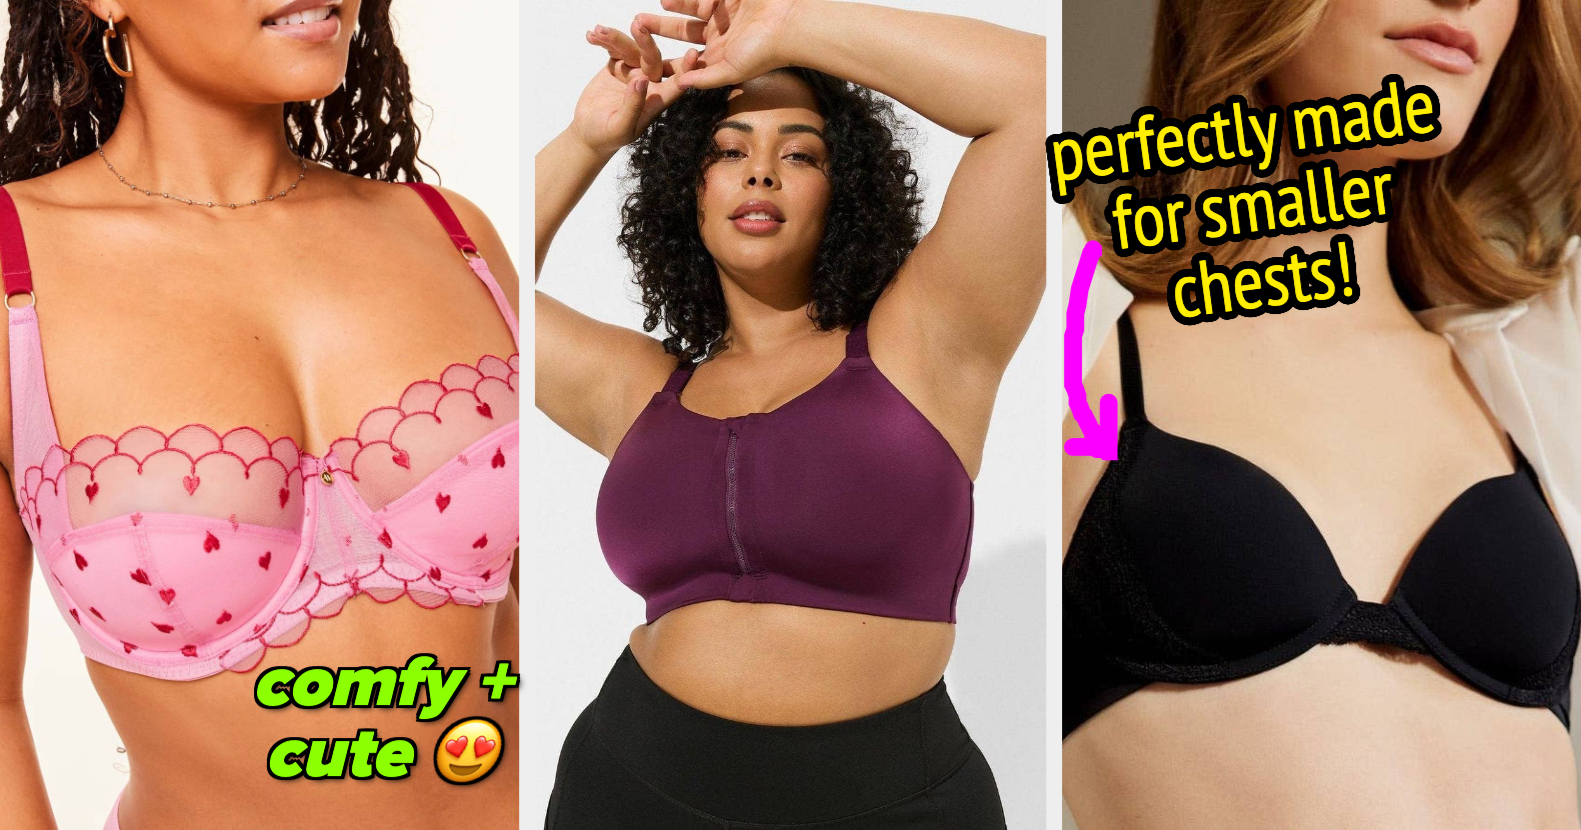 Aerie on X: From AA to DDD! You can now try on our entire size